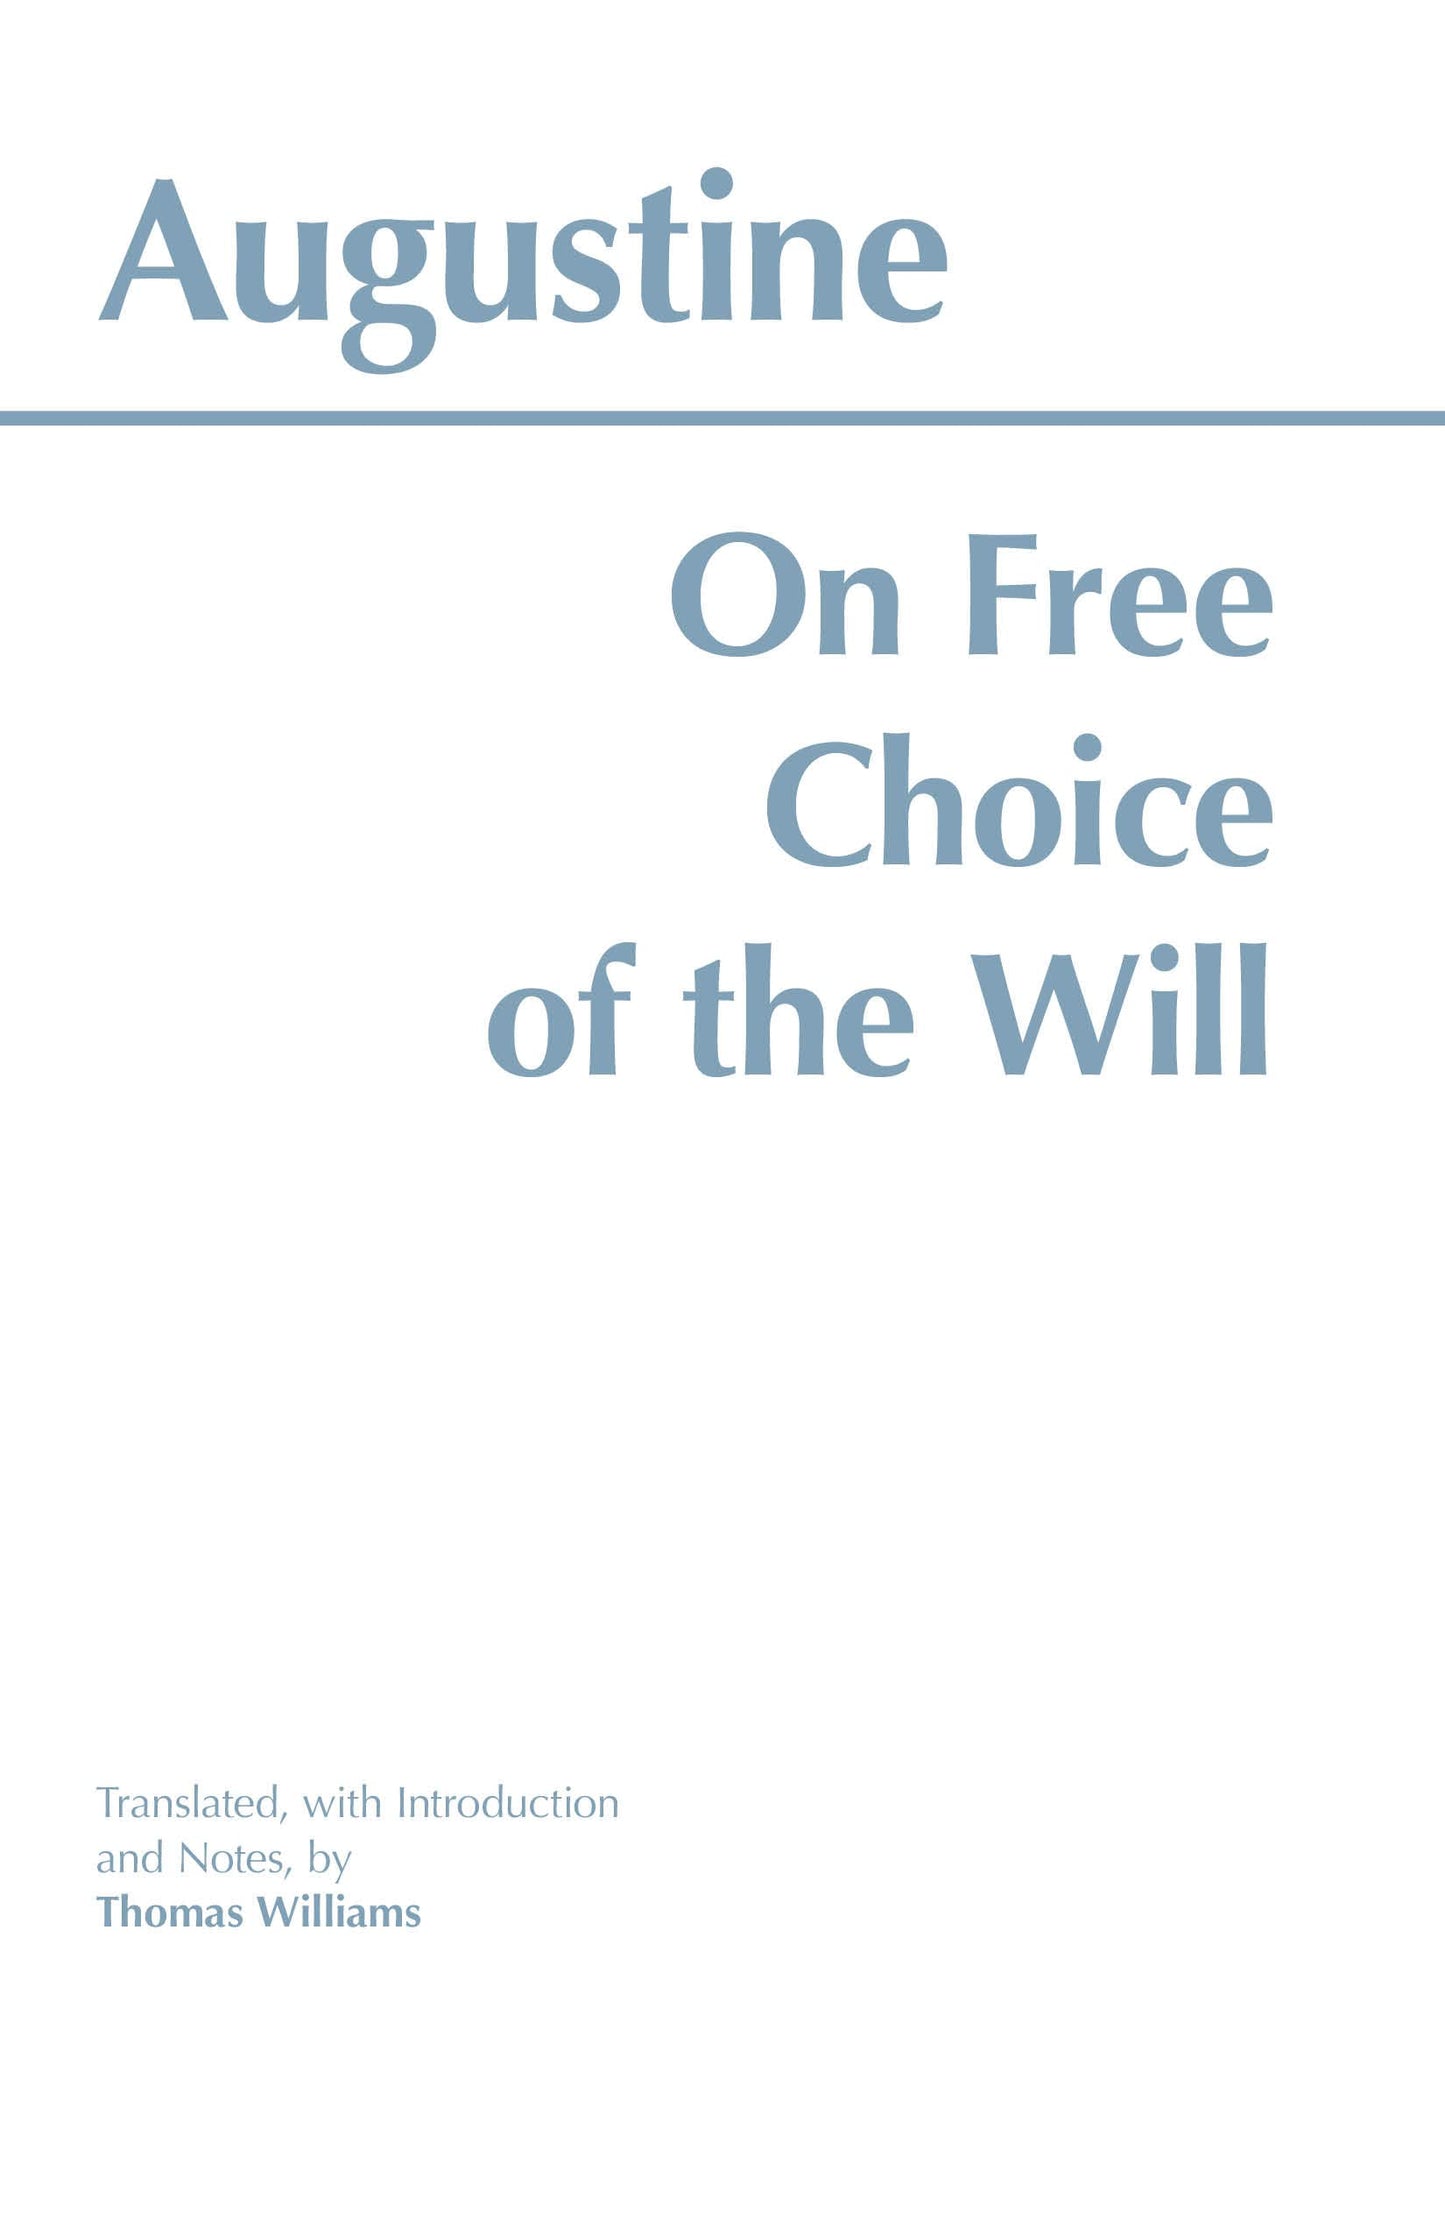 On Free Choice of the Will (Augustine - Hackett pbk)